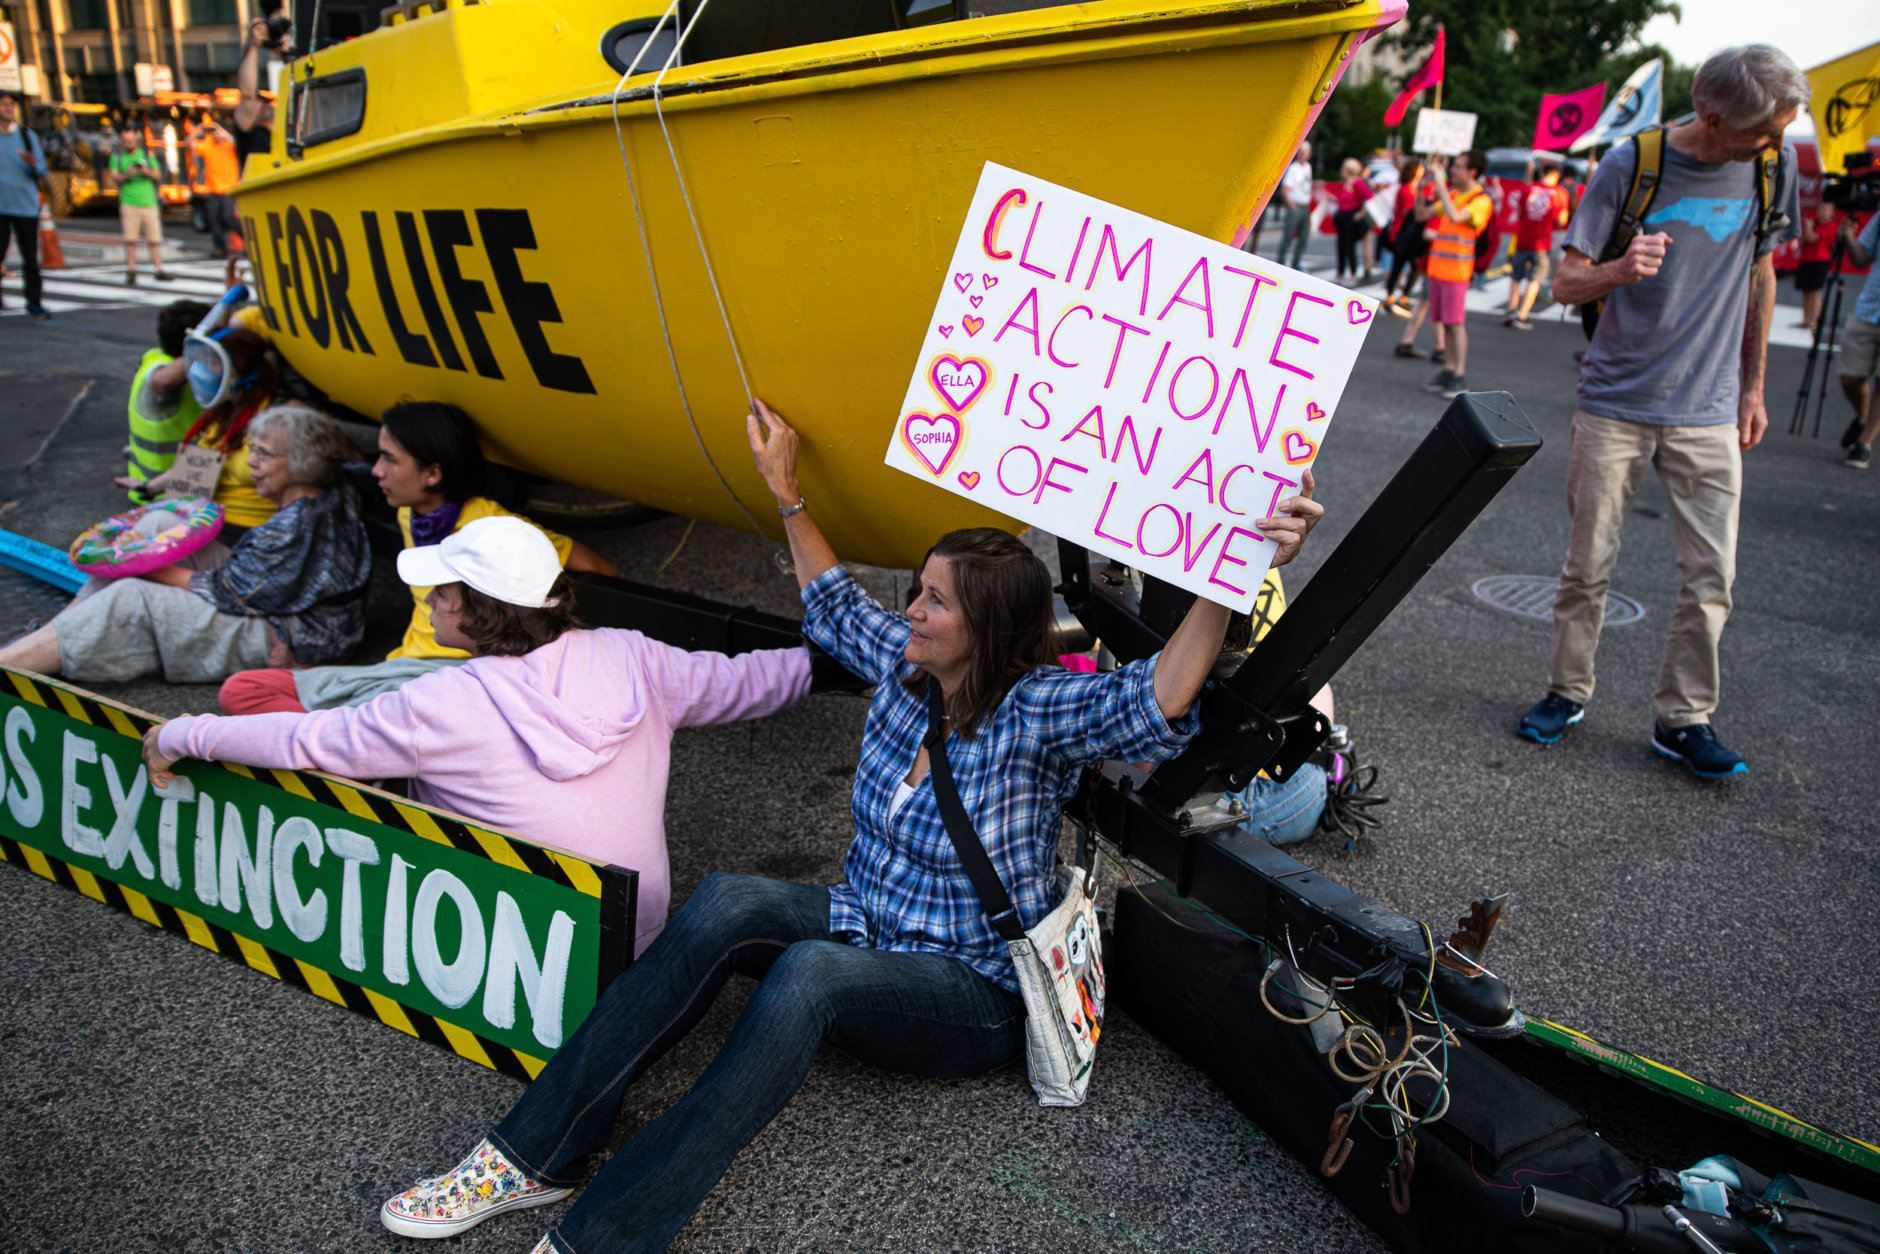 Environmental activists pressure lawmakers to declare a climate change emergency by paralyzing morning traffic in the nation's capital on Sept. 23, 2019. (WTOP/Alejandro Alvarez)